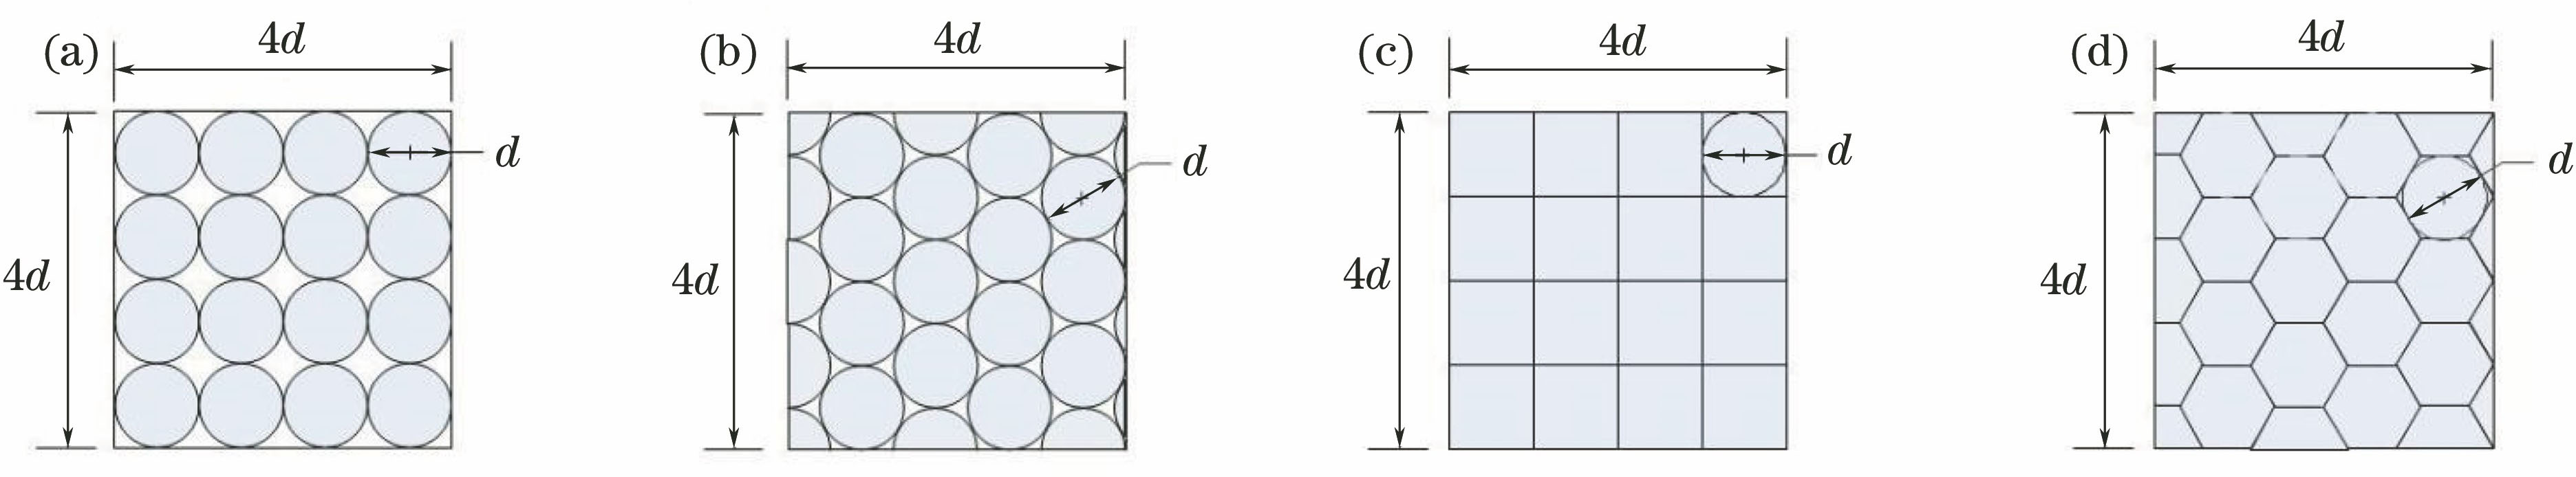 Structure of lenslet arrays with the same inscribe circle diameter of d. (a) Rectangular-packed, circular-based array; (b) honeycomb-packed, circular-based array; (c) rectangular-packed, square-based array; (d) honeycomb-packed, hexagonal-based array